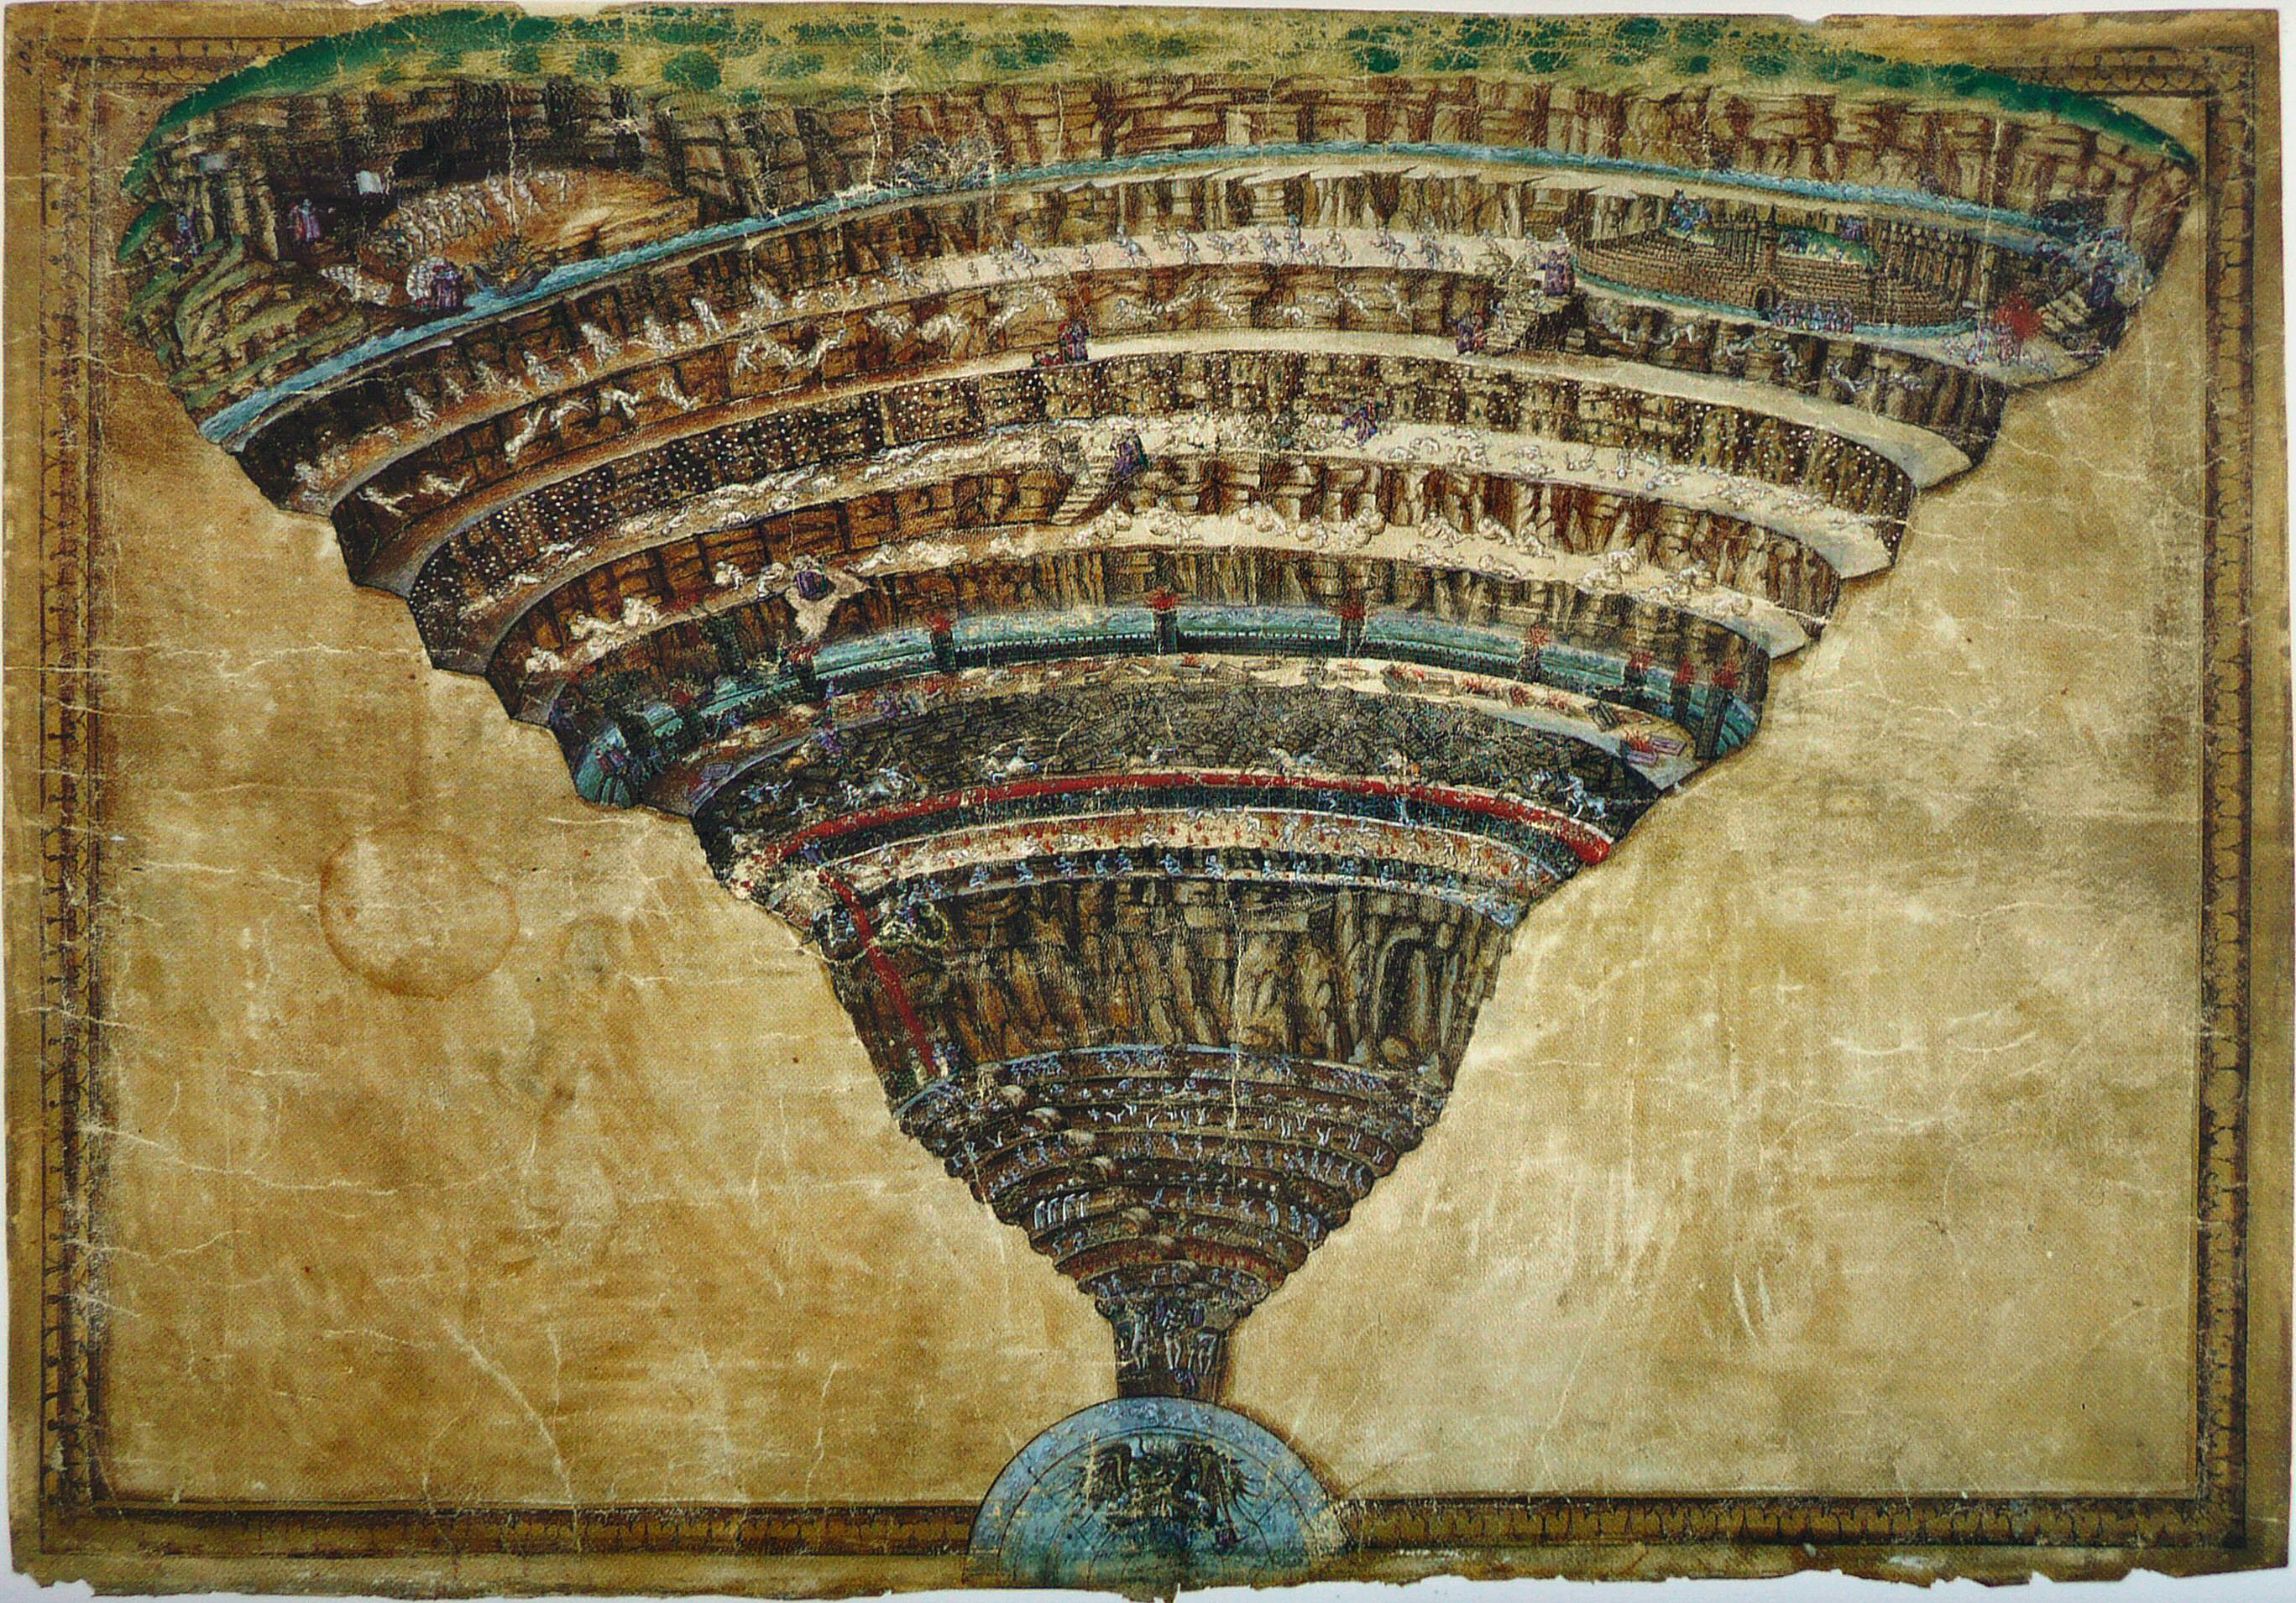 Chart of Hell by Sandro Botticelli - c. 1480-1490 - 33 × 47.5 cm  Vatican Library